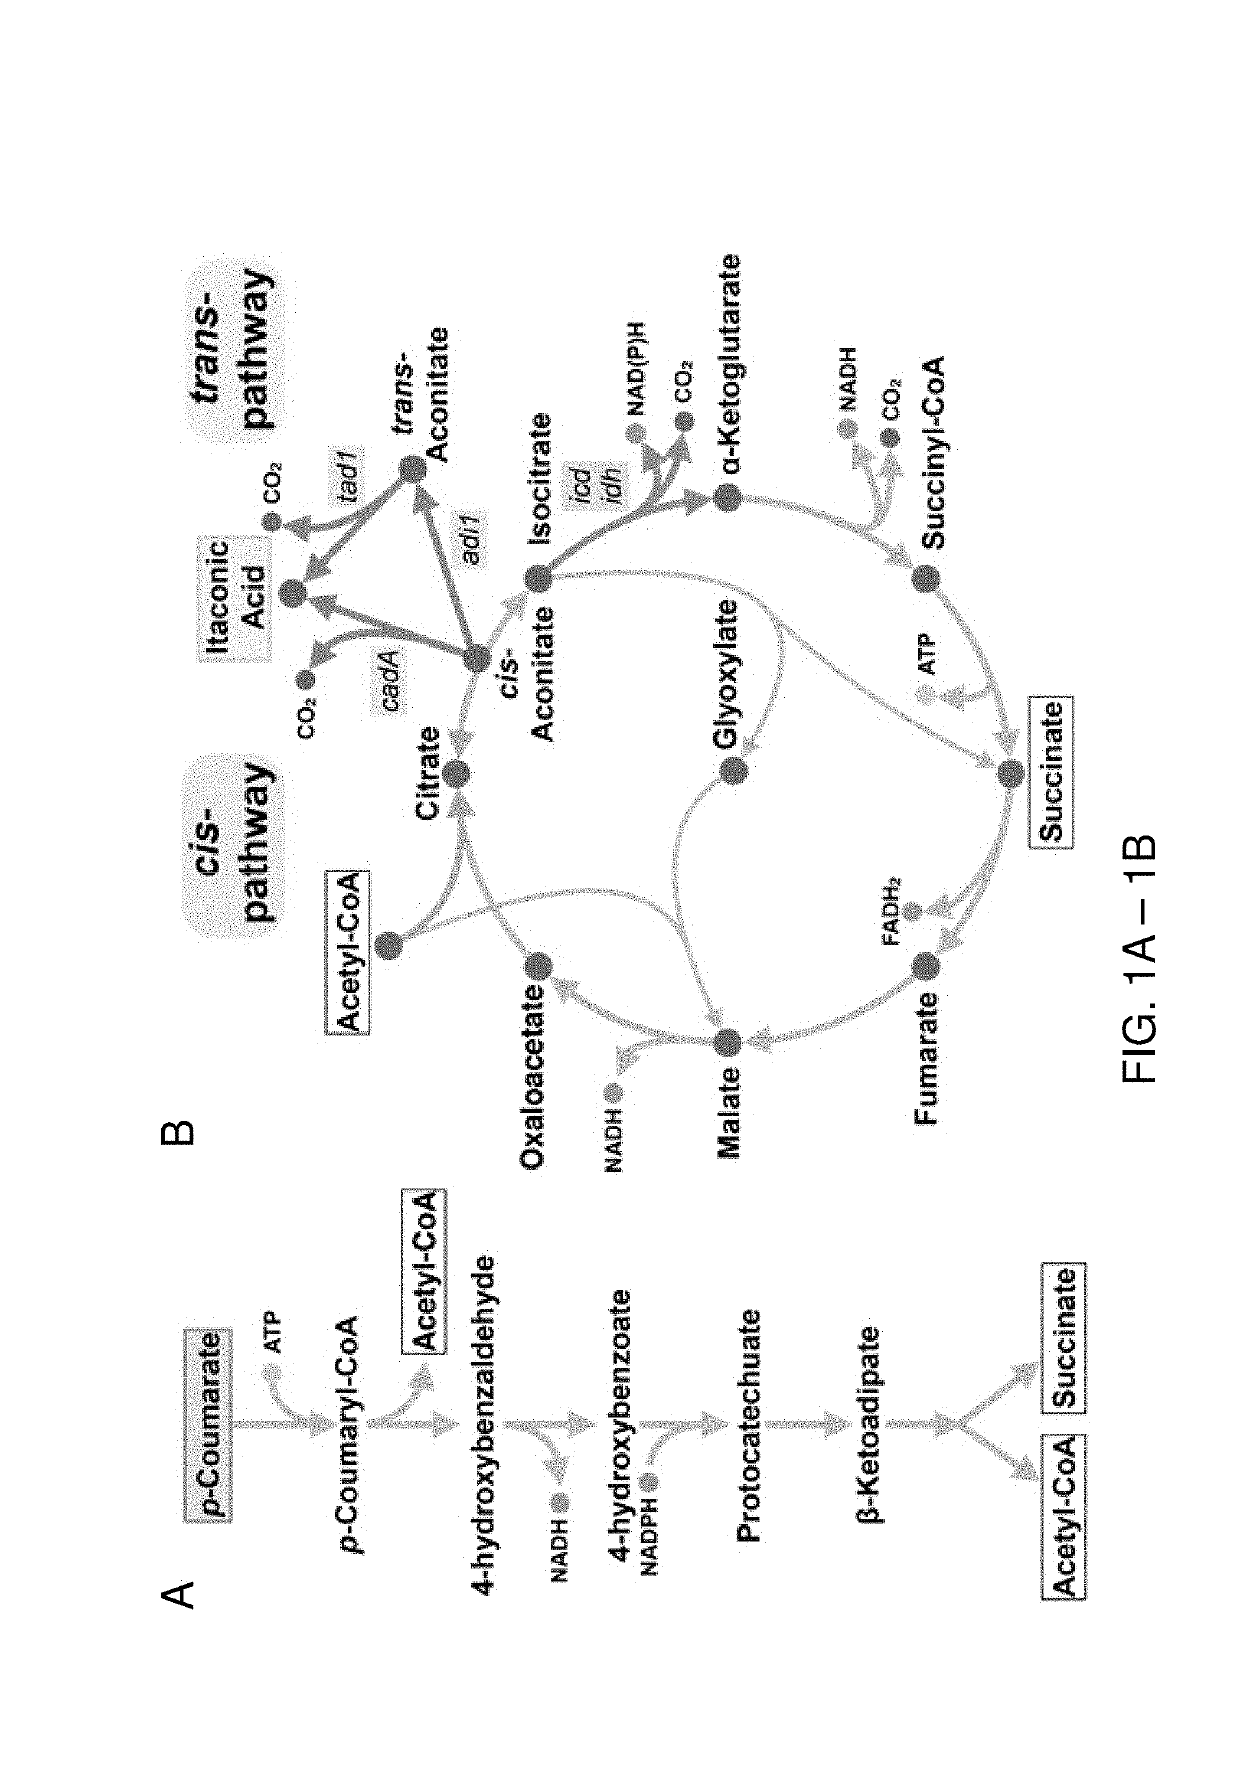 Production of itaconic acid and related molecules from aromatic compounds